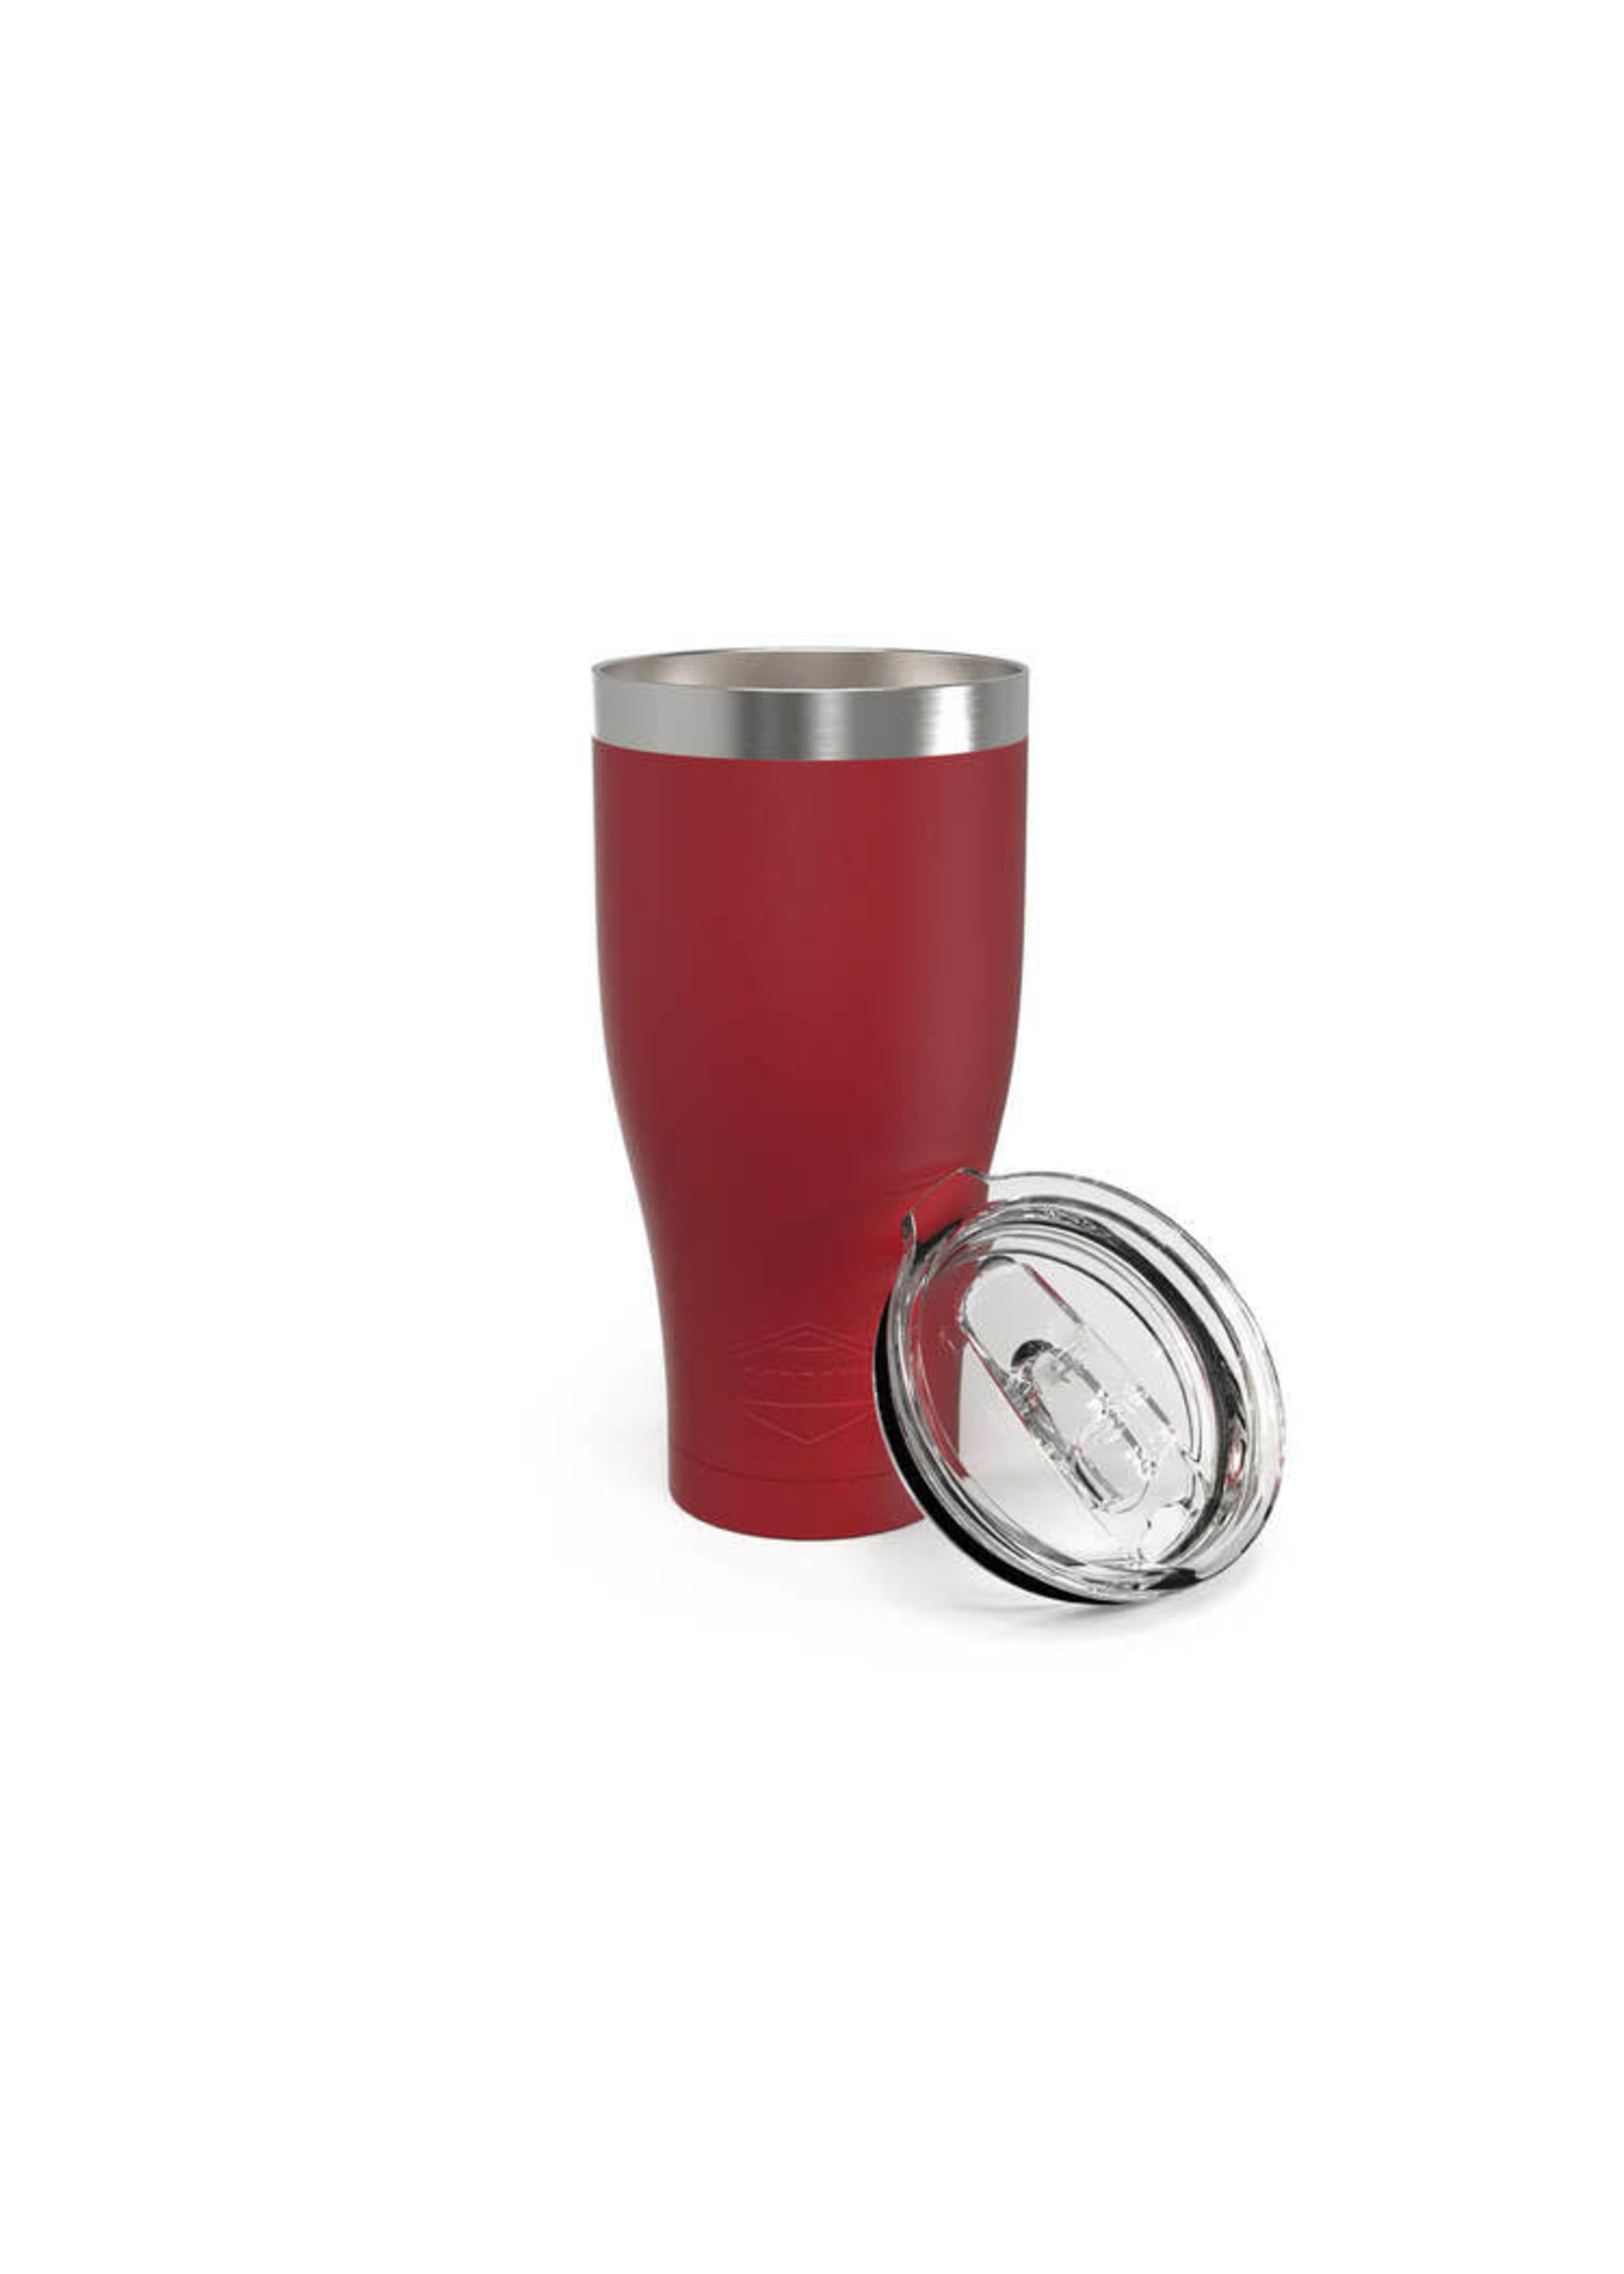 Cordova Outdoors Tumbler, Double Wall Stainless Steel Drinkware